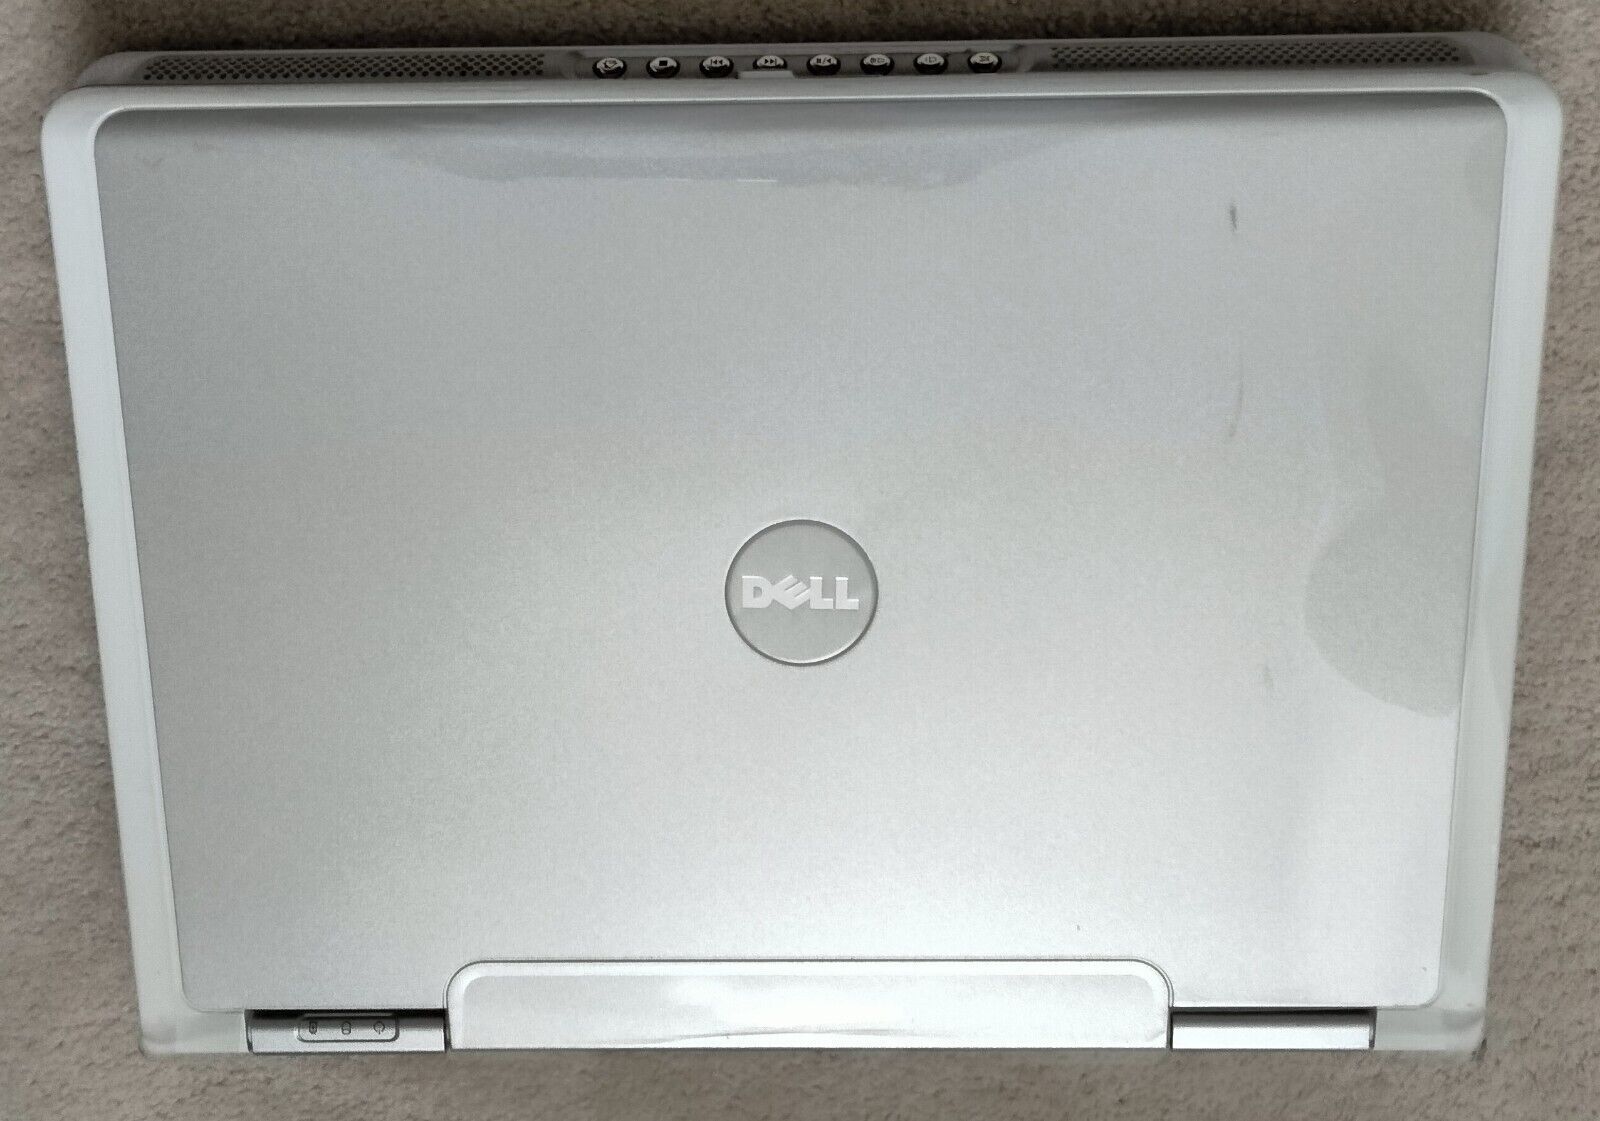 Dell Inspiron Model Number E1405 Laptop Without Hd Silver Color